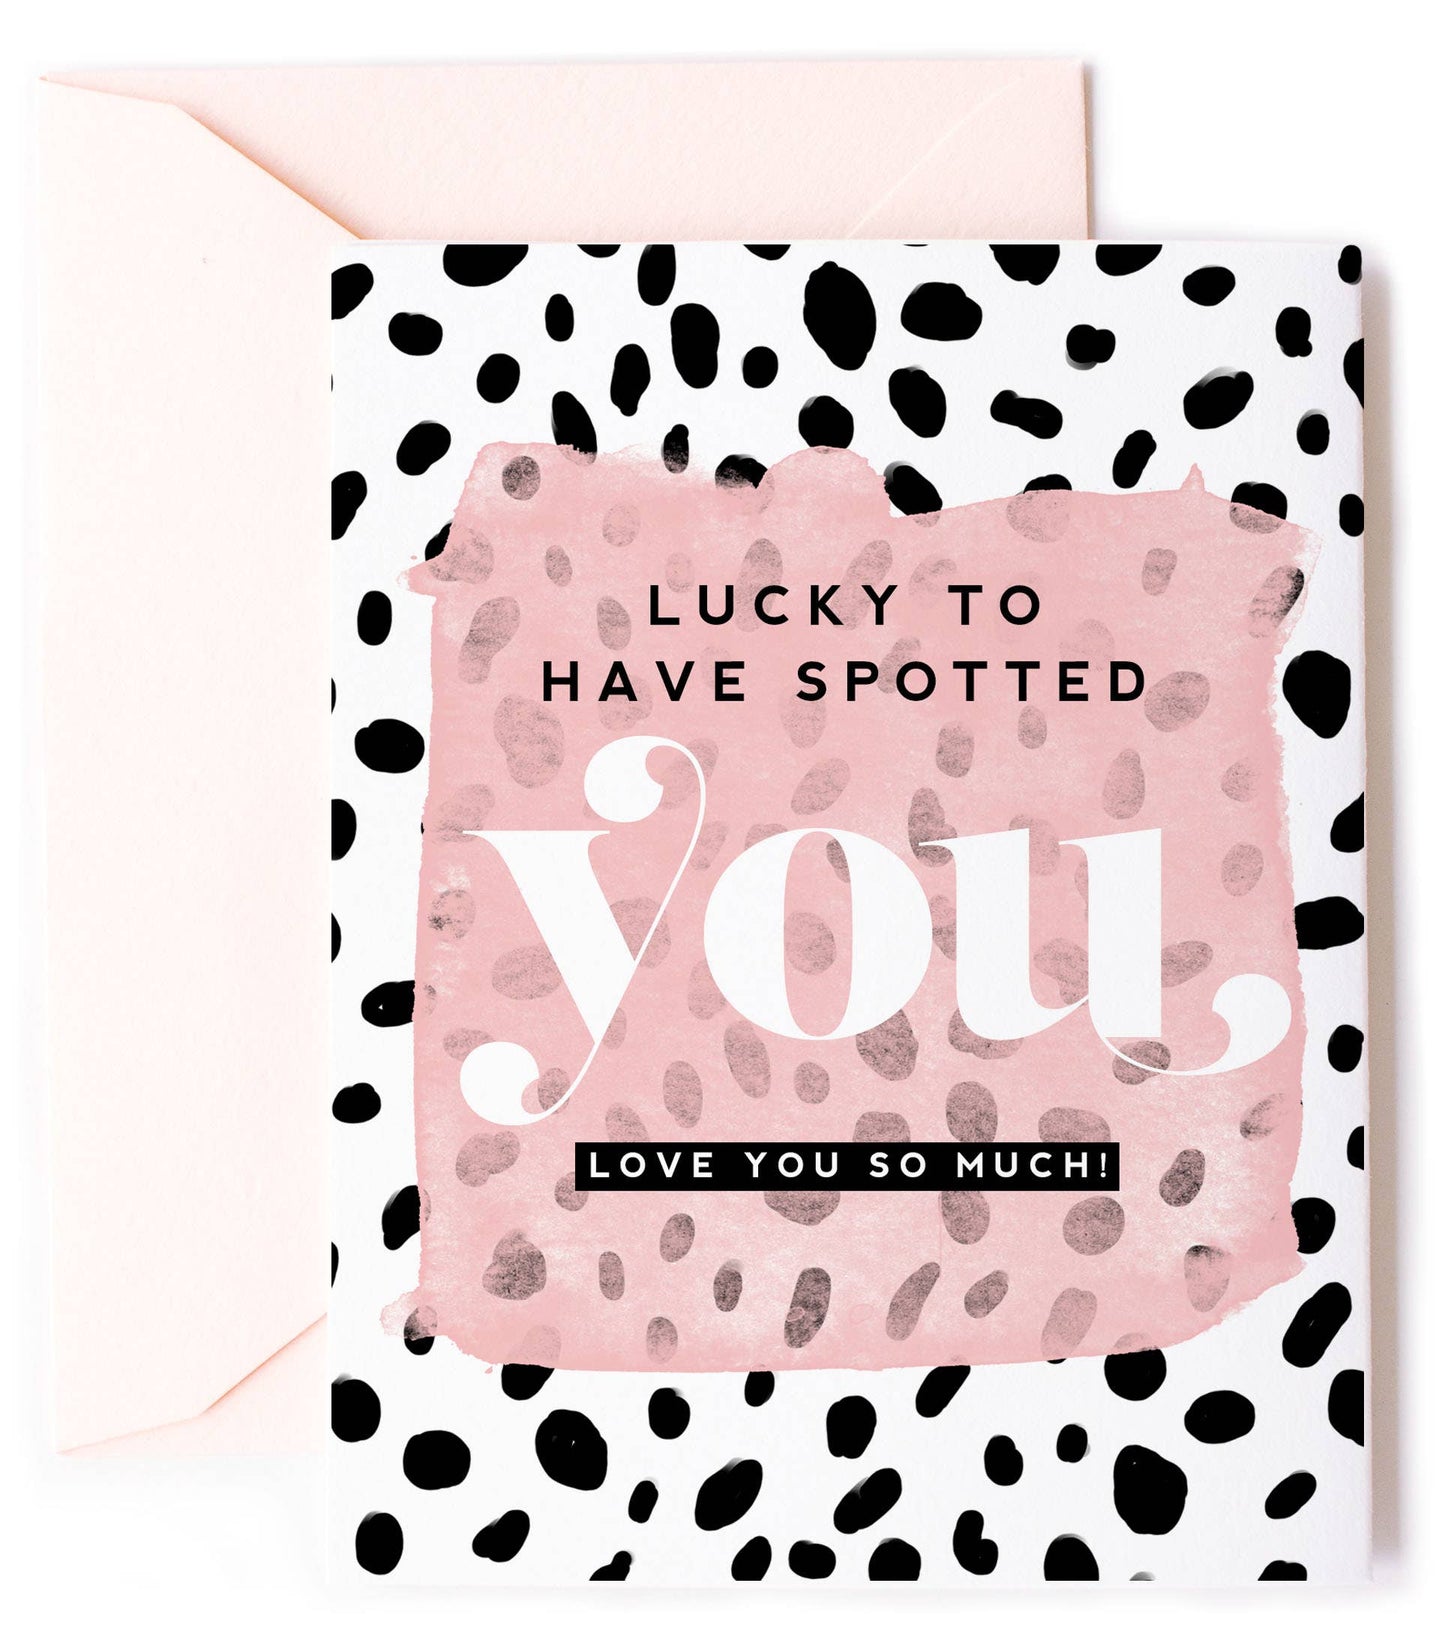 Lucky to Have Spotted You - Dalmatian Love Card